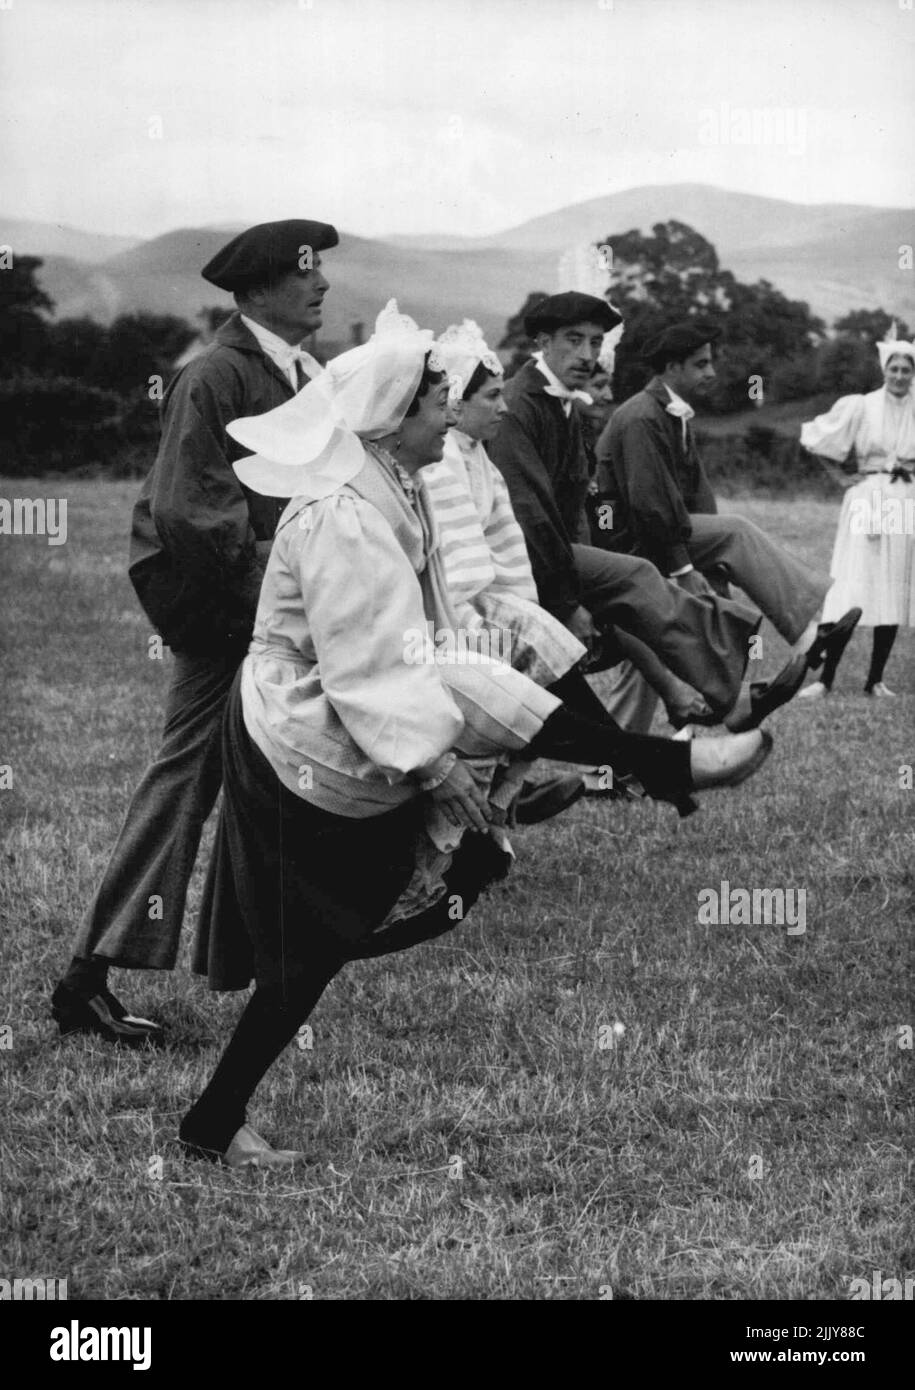 Eisteddfod Dancers From France -- 'Le Nouch' Folk Dancers from province Du Poitou, France at the Llangollen International musical Eisteddfod, North Wales, July 6. July 16, 1954. (Photo by Associated Press Photo). Stock Photo